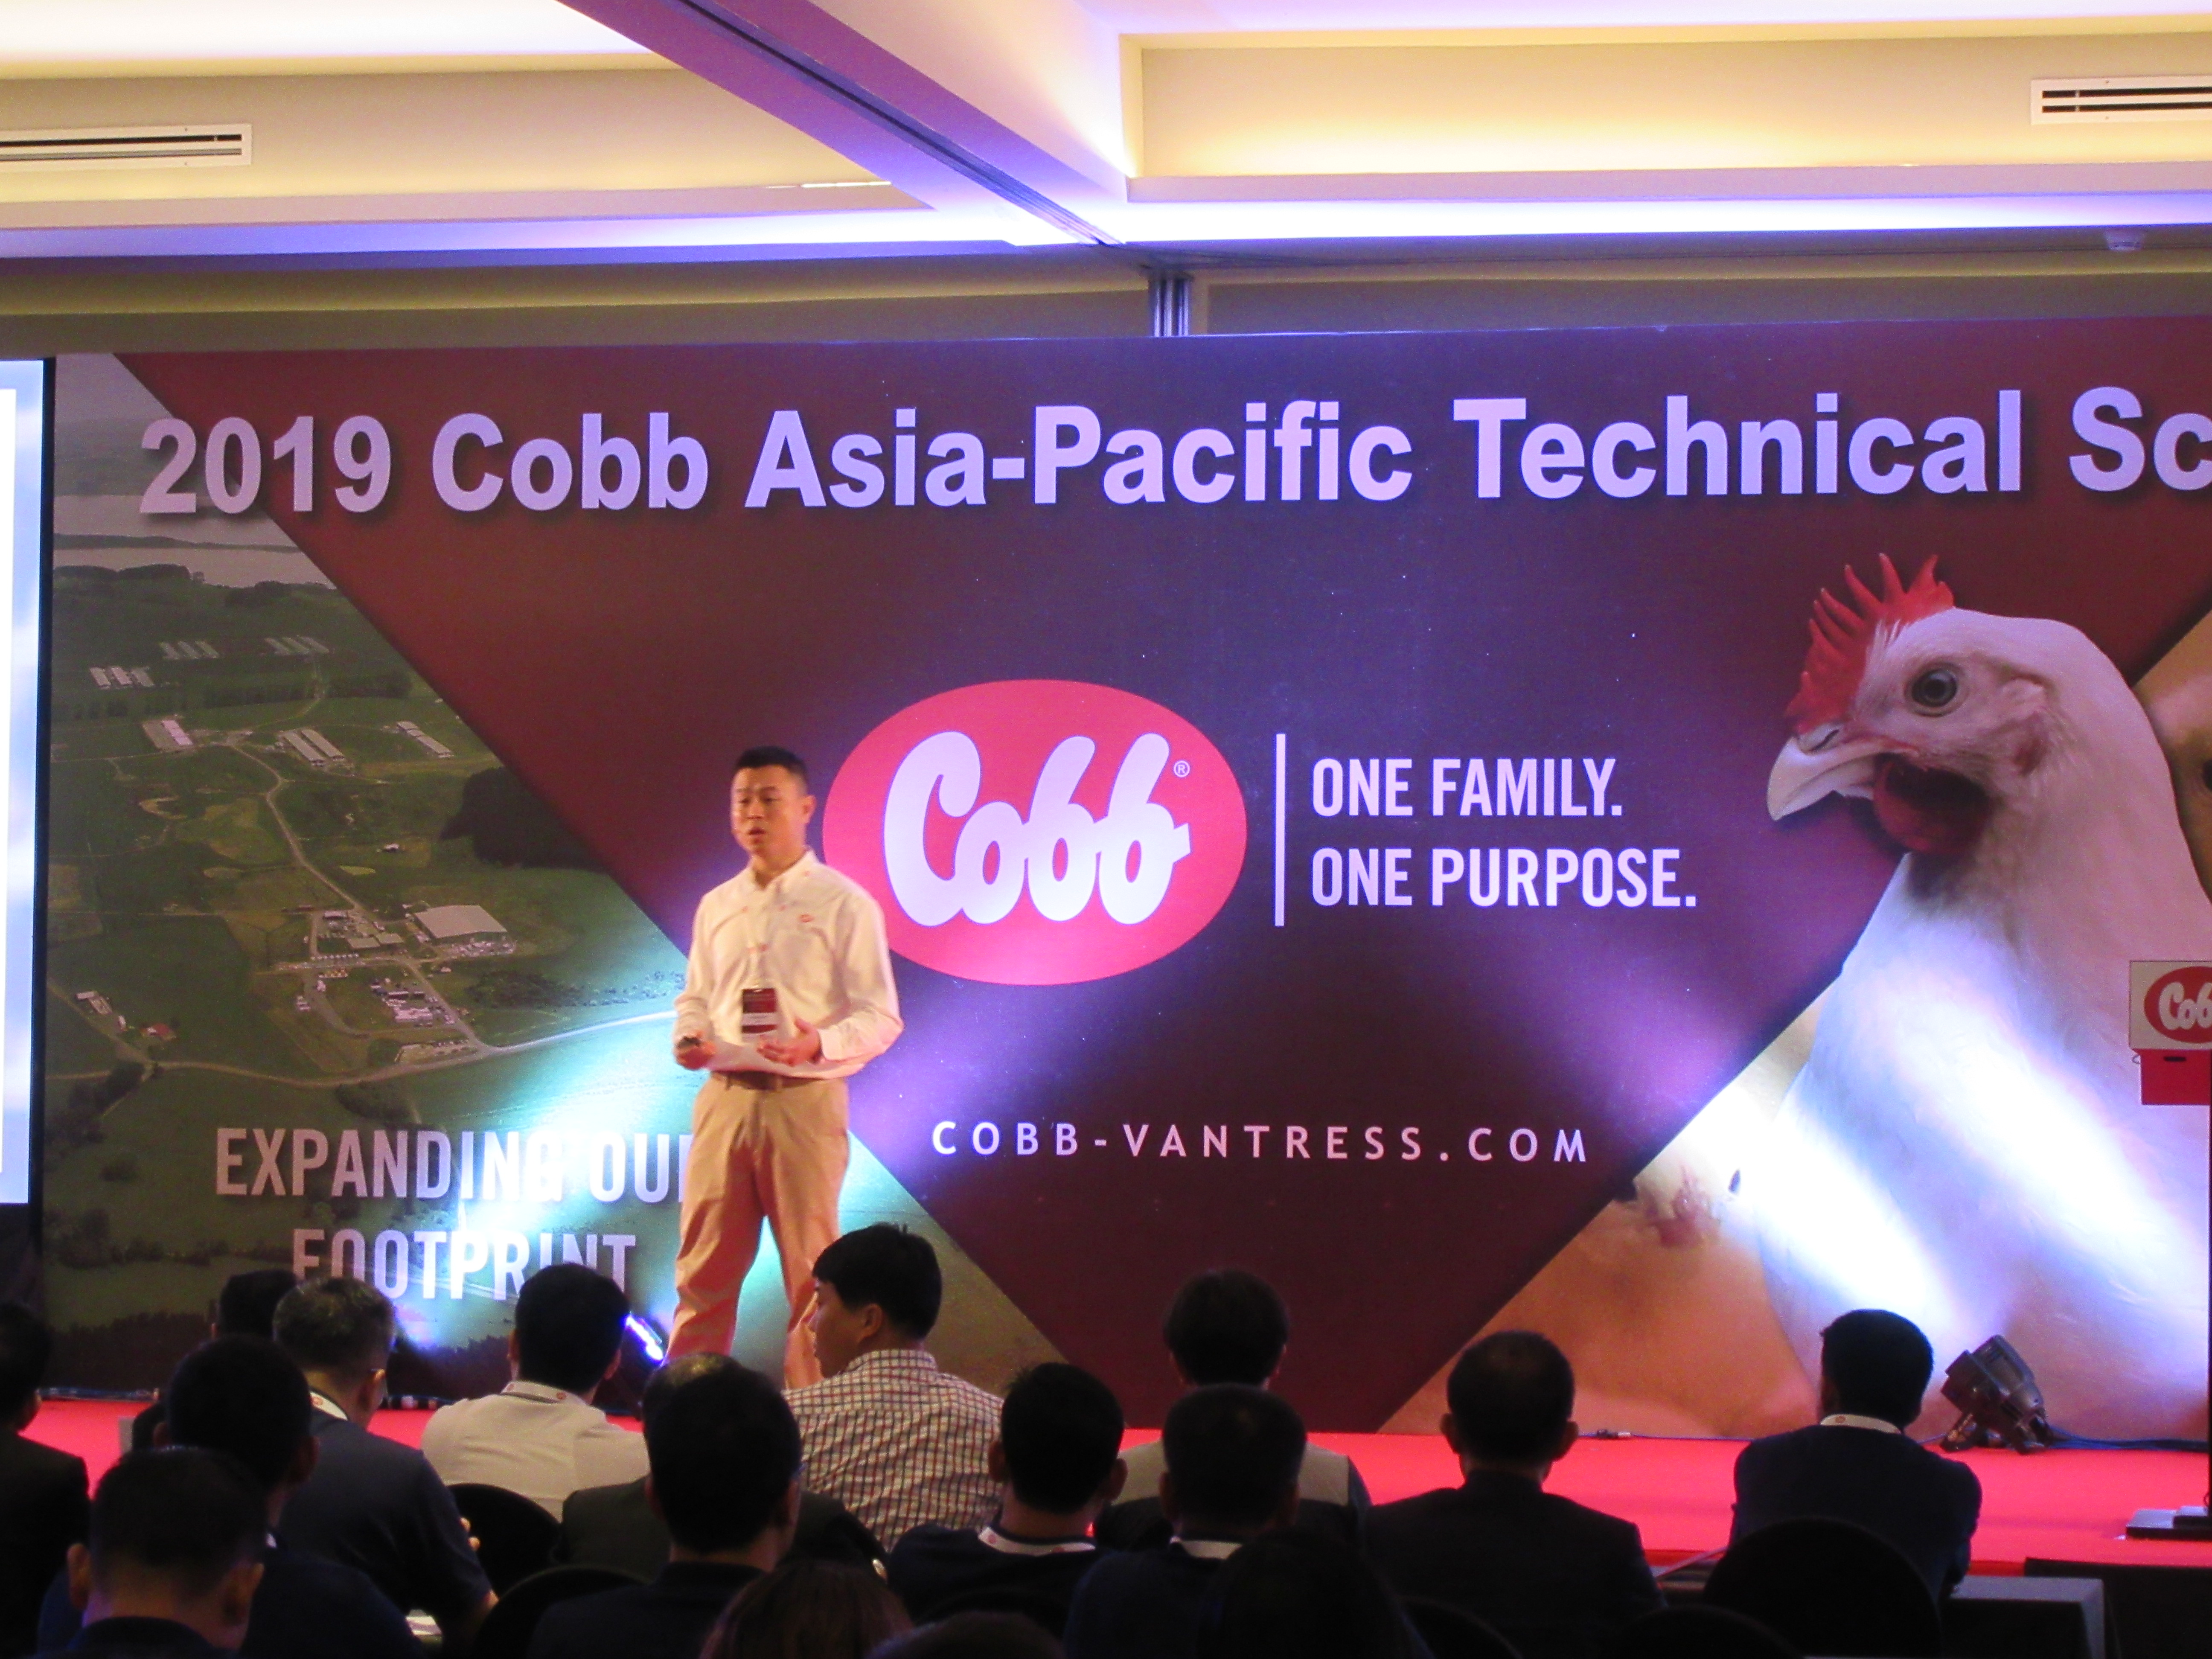 Fred Kao, general manager of Cobb Asia